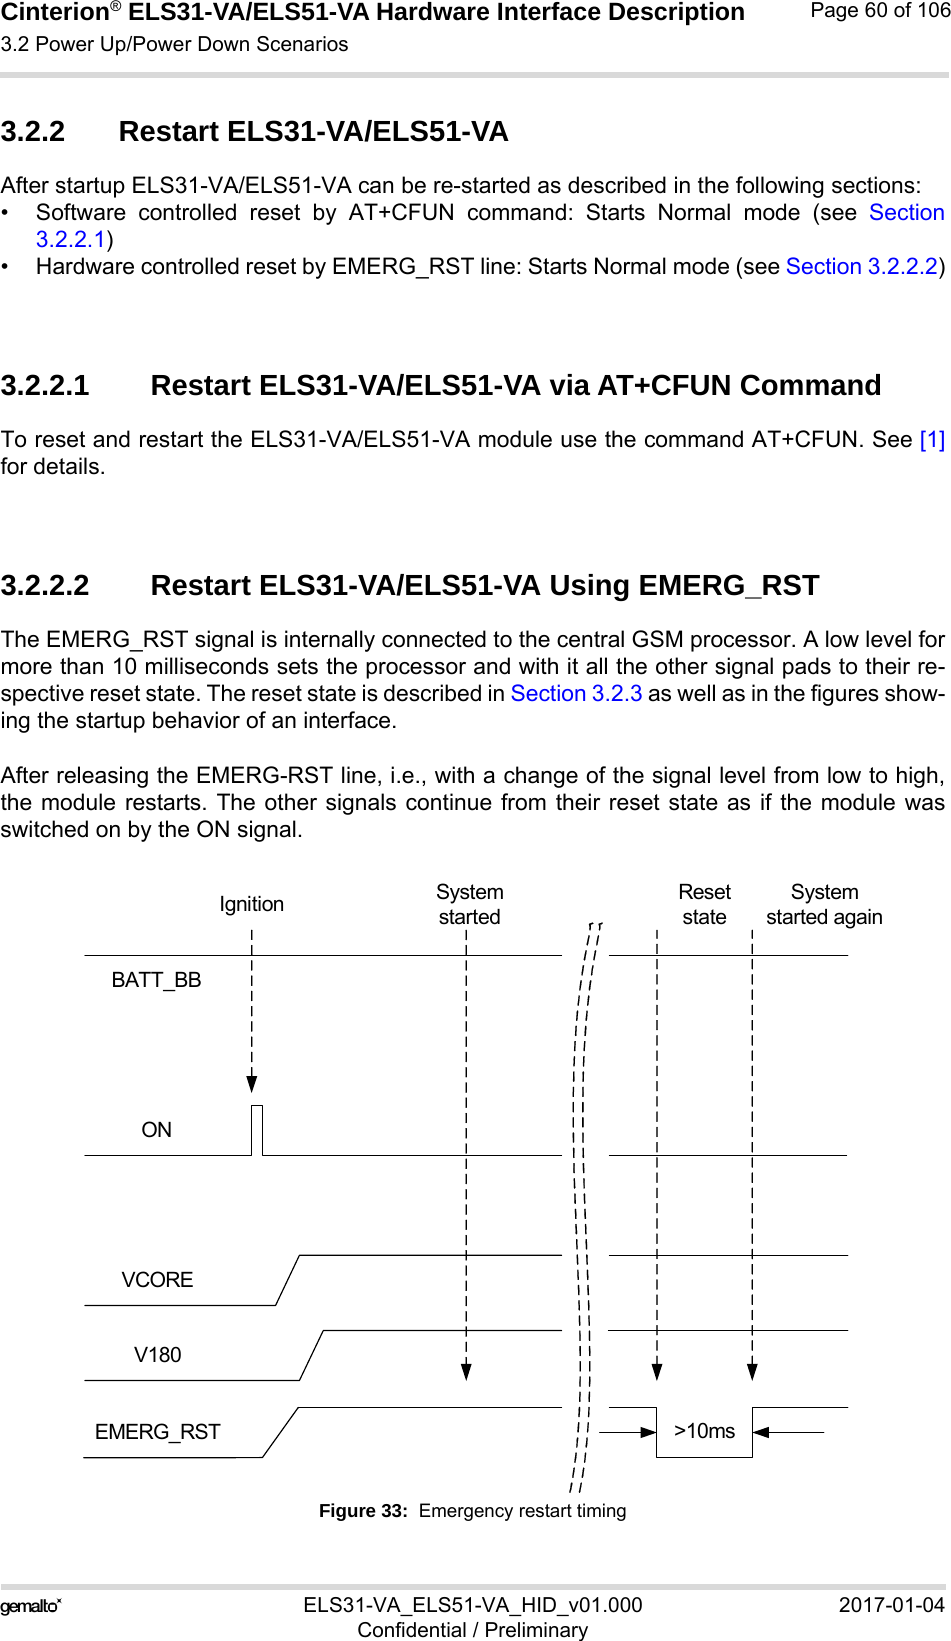 Cinterion® ELS31-VA/ELS51-VA Hardware Interface Description3.2 Power Up/Power Down Scenarios76ELS31-VA_ELS51-VA_HID_v01.000 2017-01-04Confidential / PreliminaryPage 60 of 1063.2.2 Restart ELS31-VA/ELS51-VAAfter startup ELS31-VA/ELS51-VA can be re-started as described in the following sections:• Software controlled reset by AT+CFUN command: Starts Normal mode (see Section3.2.2.1)• Hardware controlled reset by EMERG_RST line: Starts Normal mode (see Section 3.2.2.2)3.2.2.1 Restart ELS31-VA/ELS51-VA via AT+CFUN CommandTo reset and restart the ELS31-VA/ELS51-VA module use the command AT+CFUN. See [1]for details.3.2.2.2 Restart ELS31-VA/ELS51-VA Using EMERG_RSTThe EMERG_RST signal is internally connected to the central GSM processor. A low level formore than 10 milliseconds sets the processor and with it all the other signal pads to their re-spective reset state. The reset state is described in Section 3.2.3 as well as in the figures show-ing the startup behavior of an interface.After releasing the EMERG-RST line, i.e., with a change of the signal level from low to high,the module restarts. The other signals continue from their reset state as if the module wasswitched on by the ON signal. Figure 33:  Emergency restart timingBATT_BBONEMERG_RSTVCOREV180&gt;10msSystem startedSystem started againReset stateIgnition